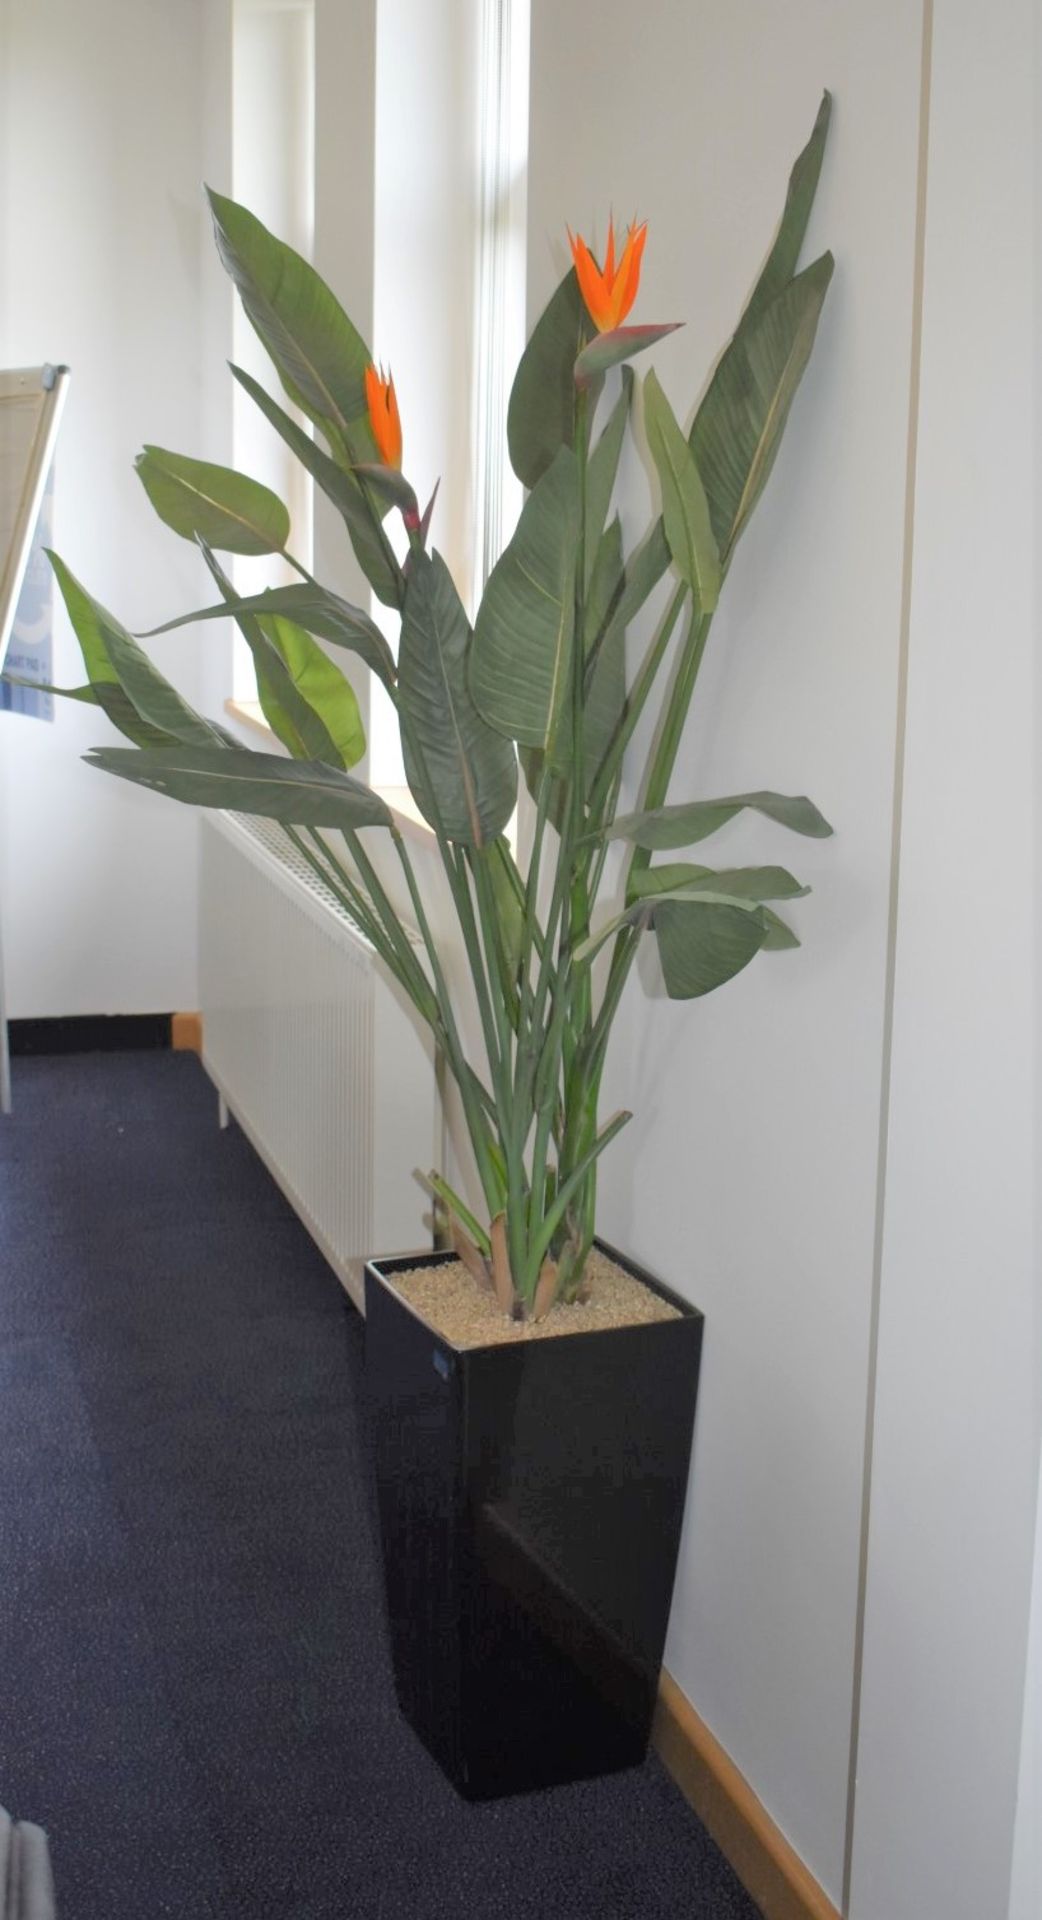 3 x Artificial Plants With Planters - Overall Height 190cm Approx - Ref: FF112 U - CL544 - Location: